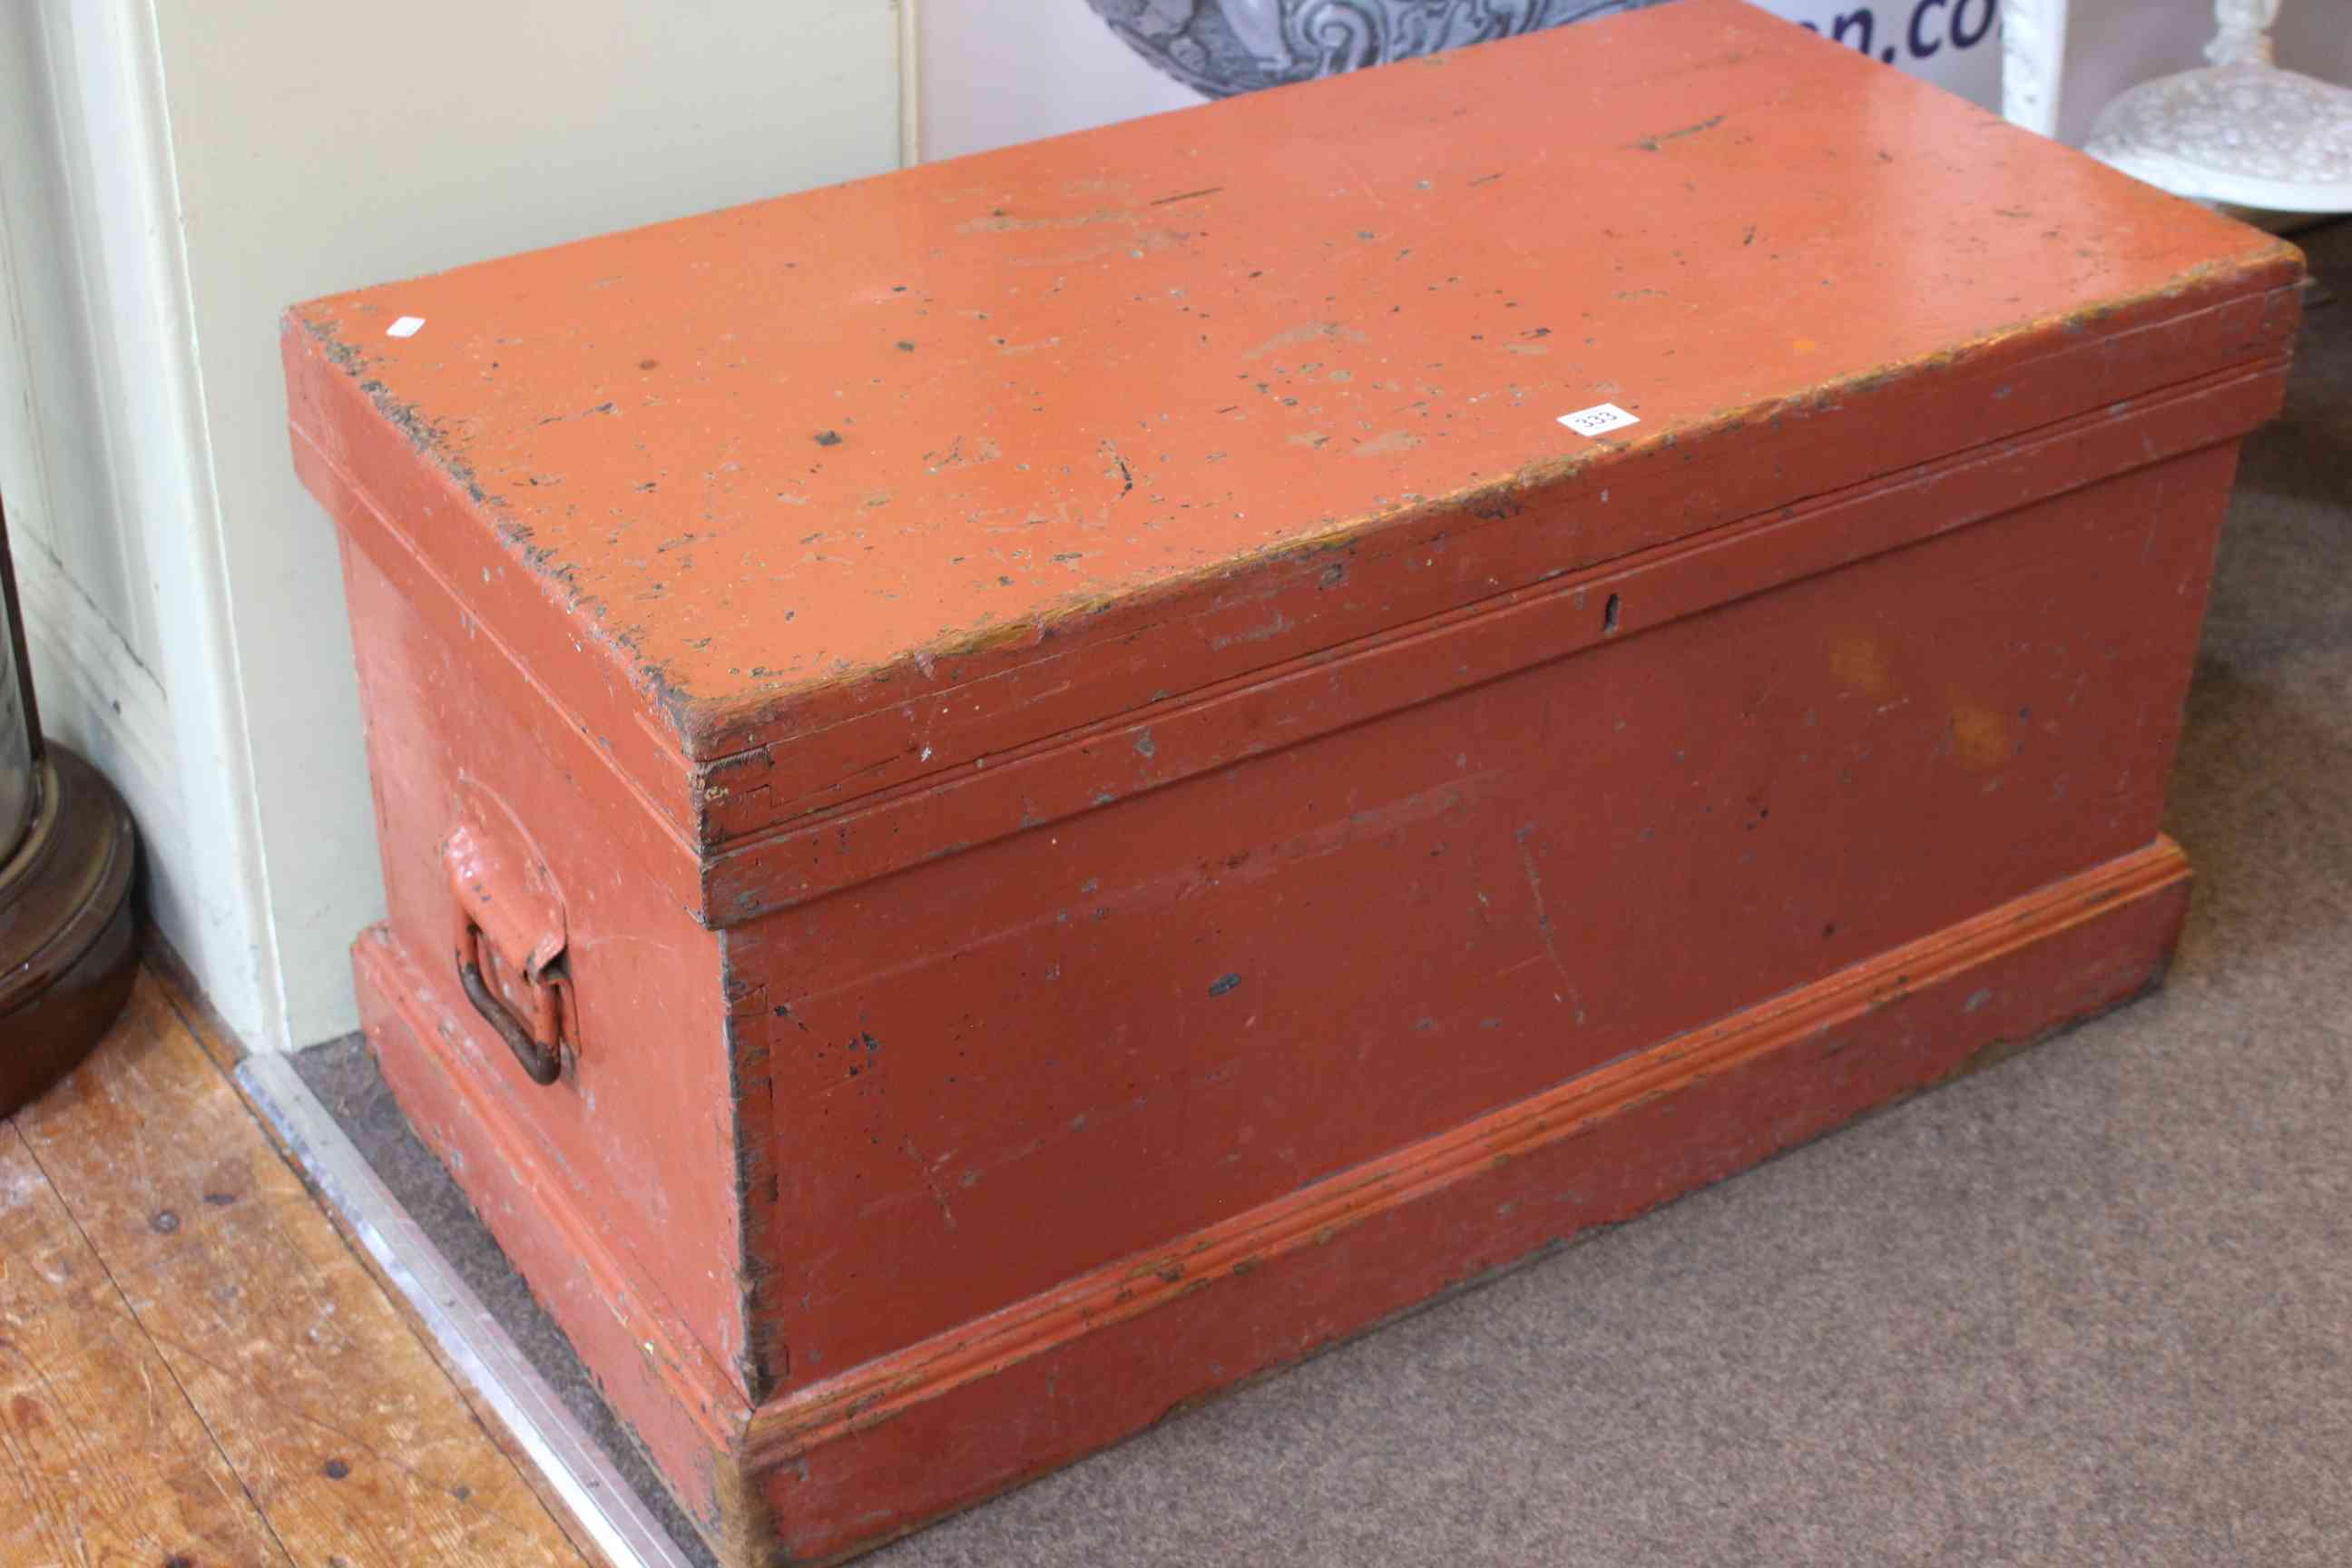 Painted pine tool box with internal fitted trays, 46cm high by 92cm wide by 46cm deep.